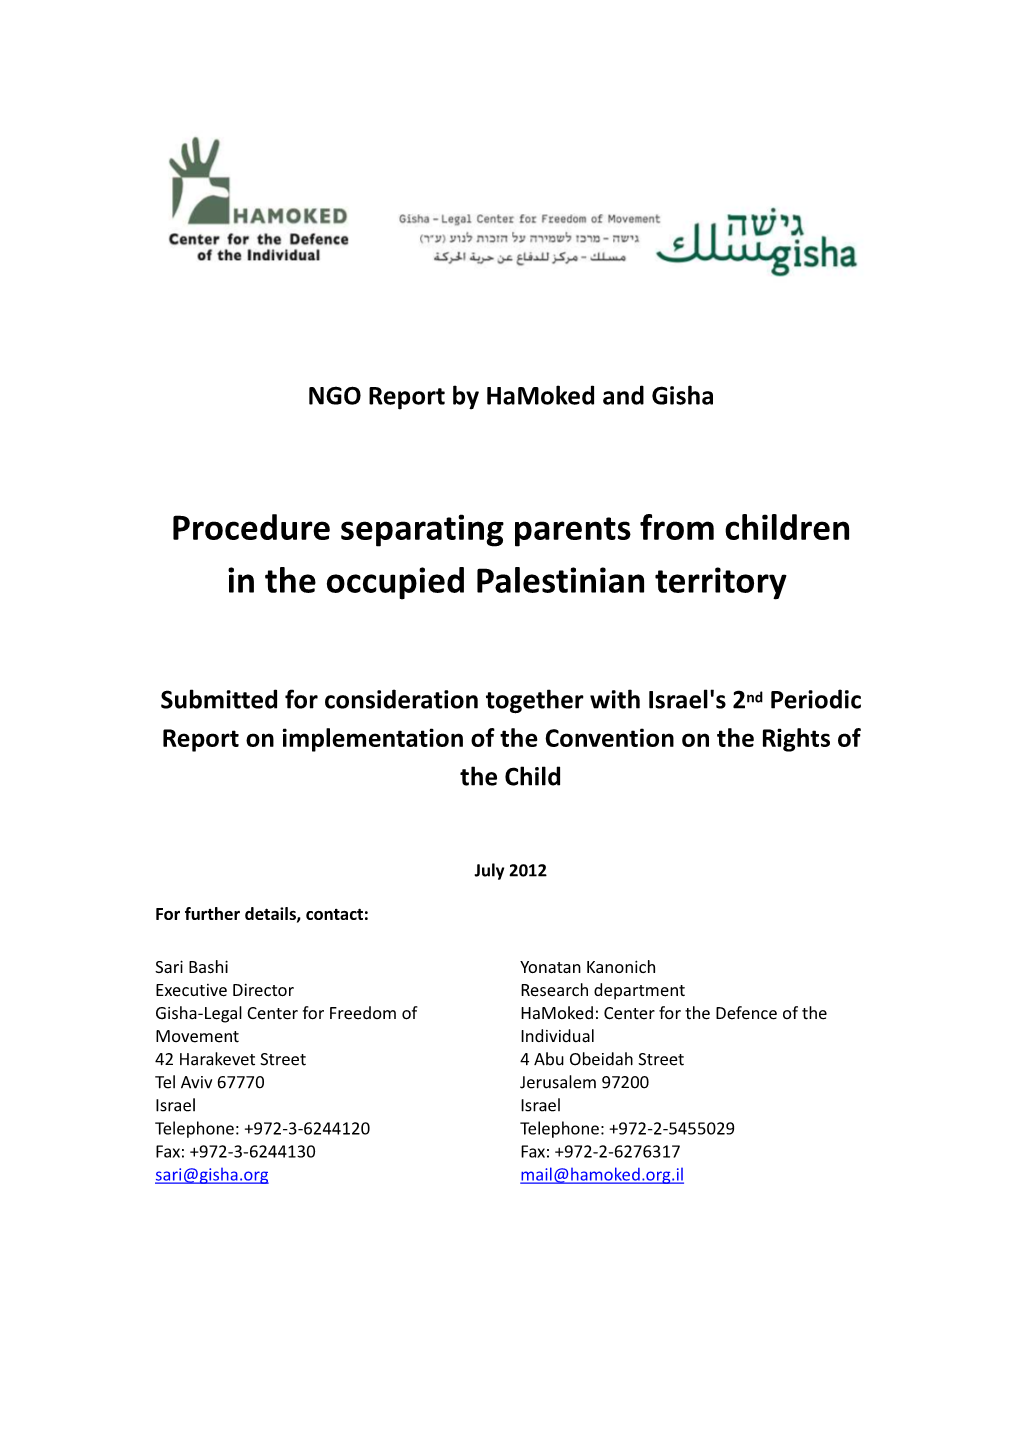 Procedure Separating Parents from Children in the Occupied Palestinian Territory